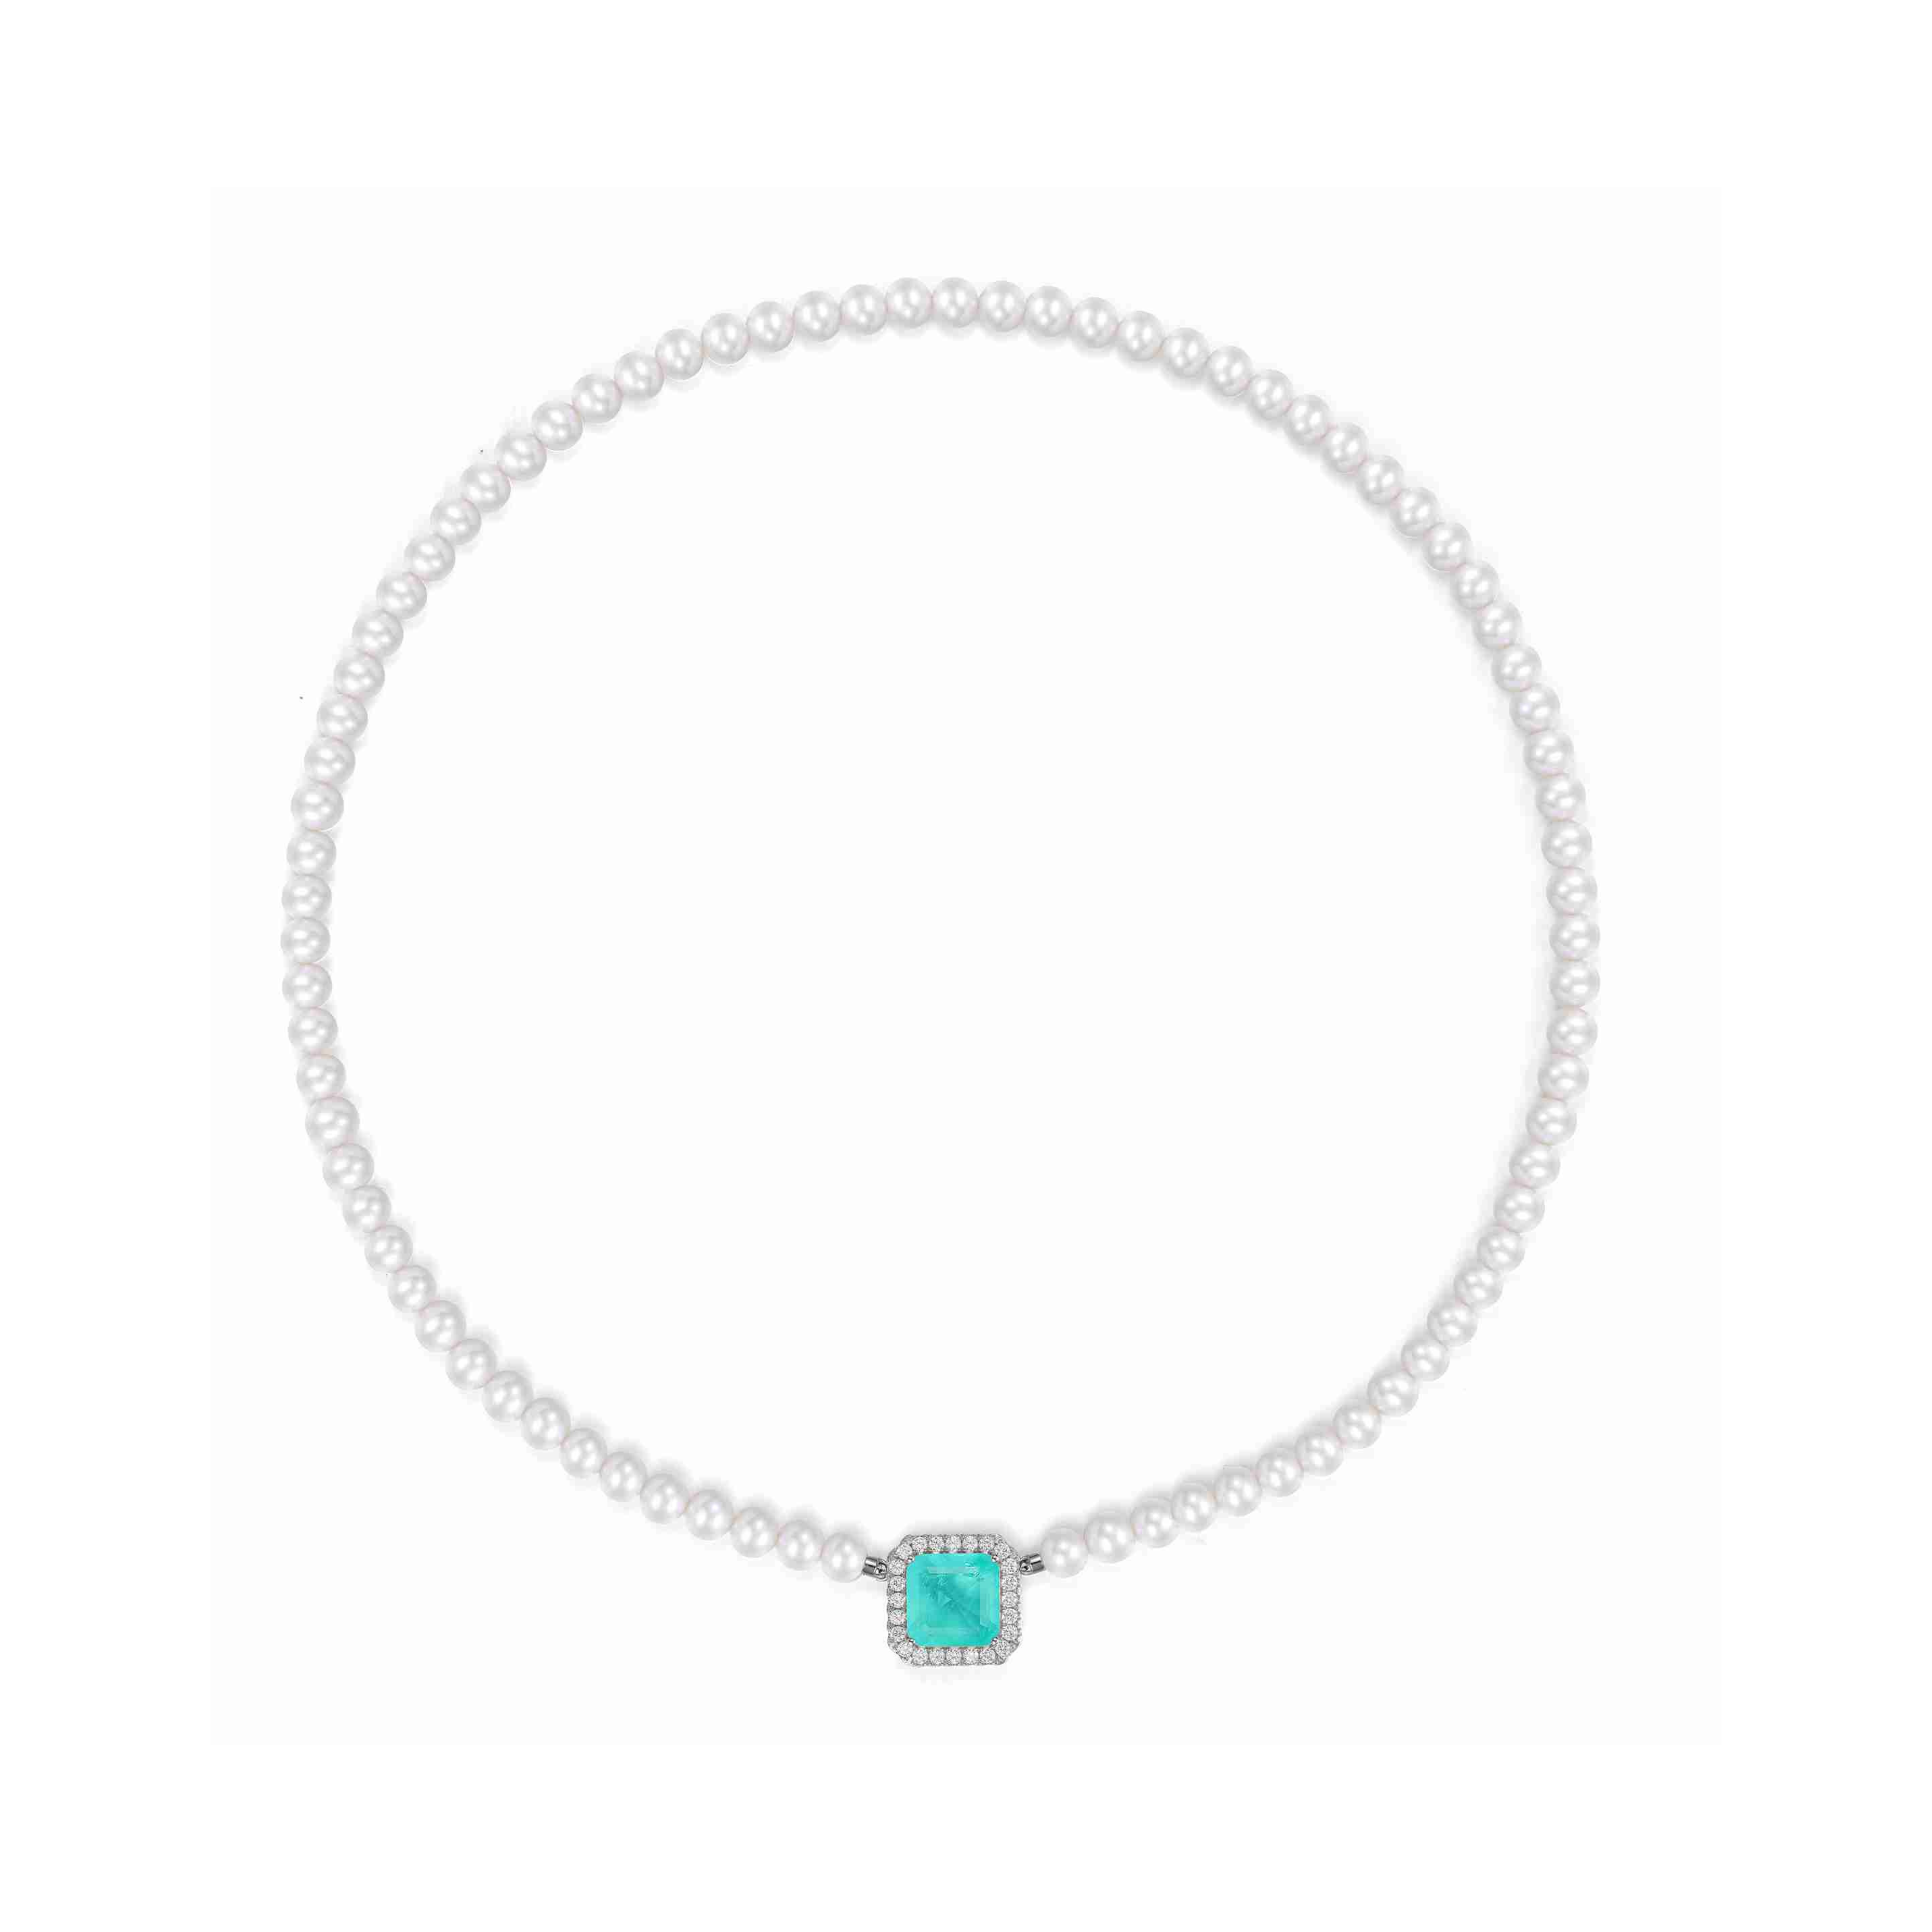 Freshwater Pearl Necklace with Paraiba Tourmaline and Moissanite